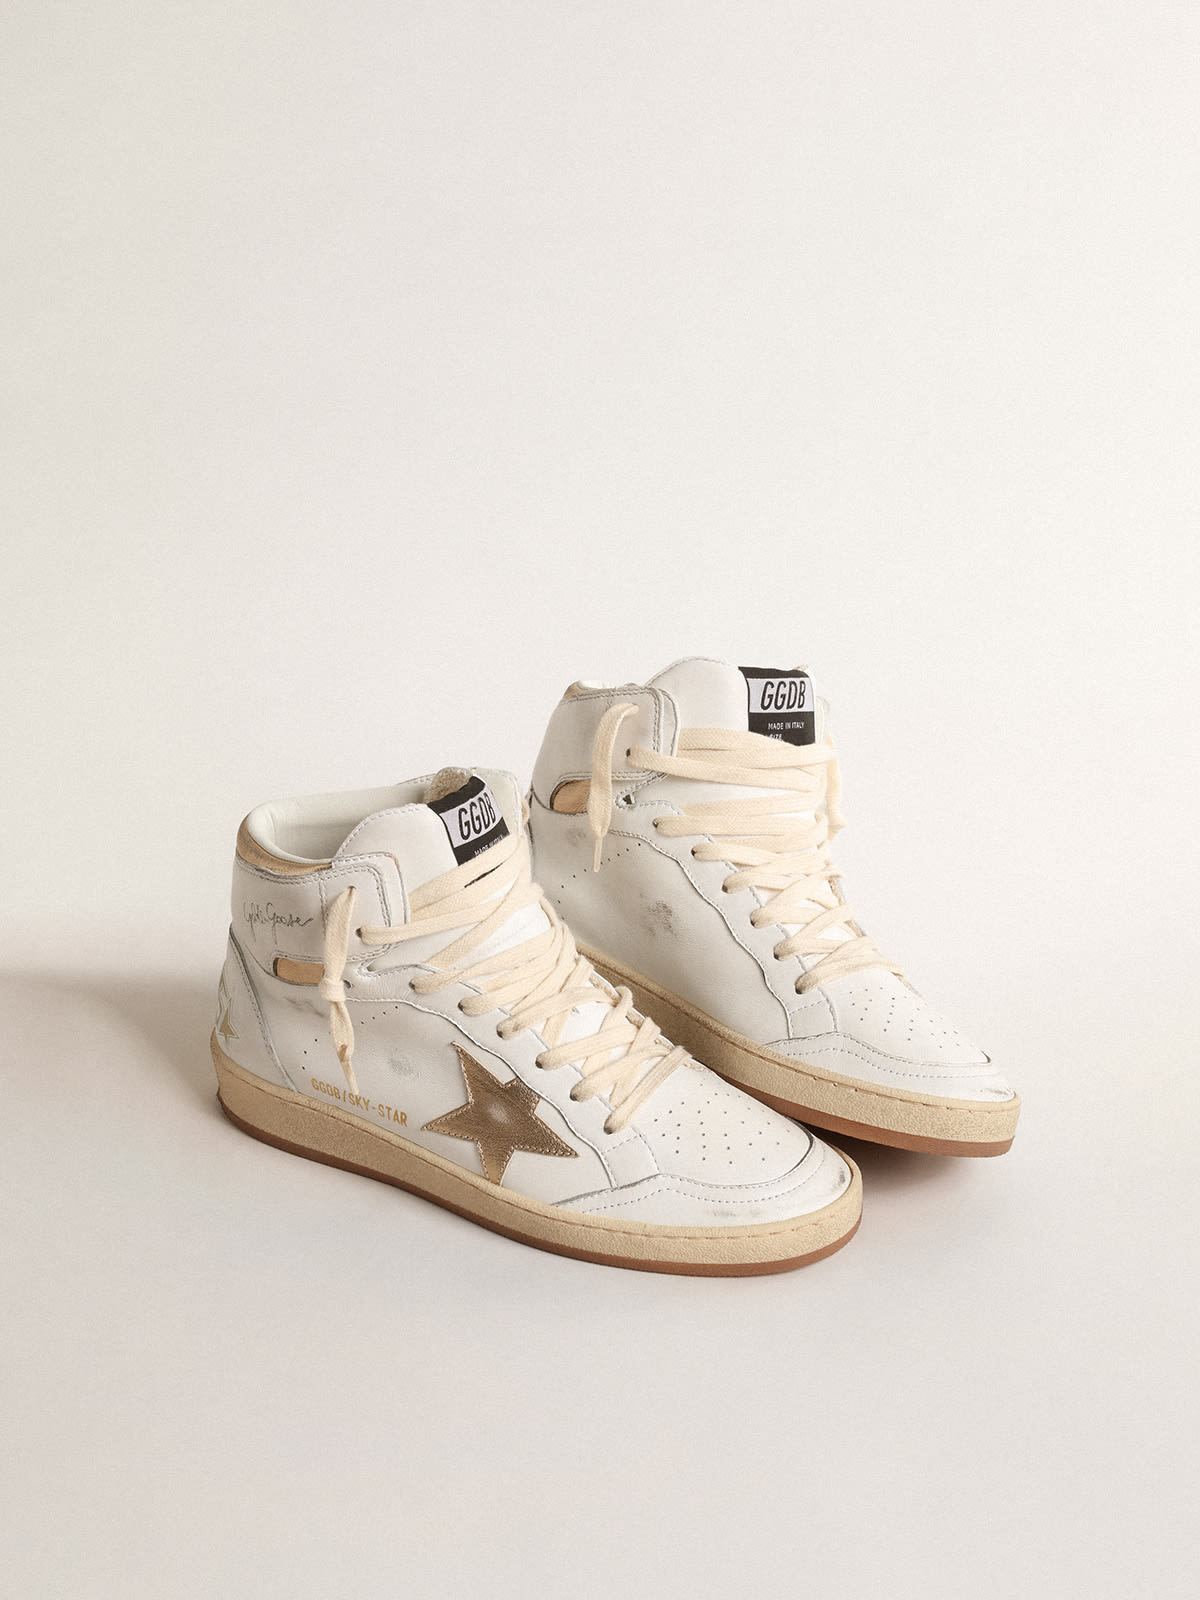 Golden Goose - Sky-Star in white nappa leather with gold metallic leather star and heel tab in 